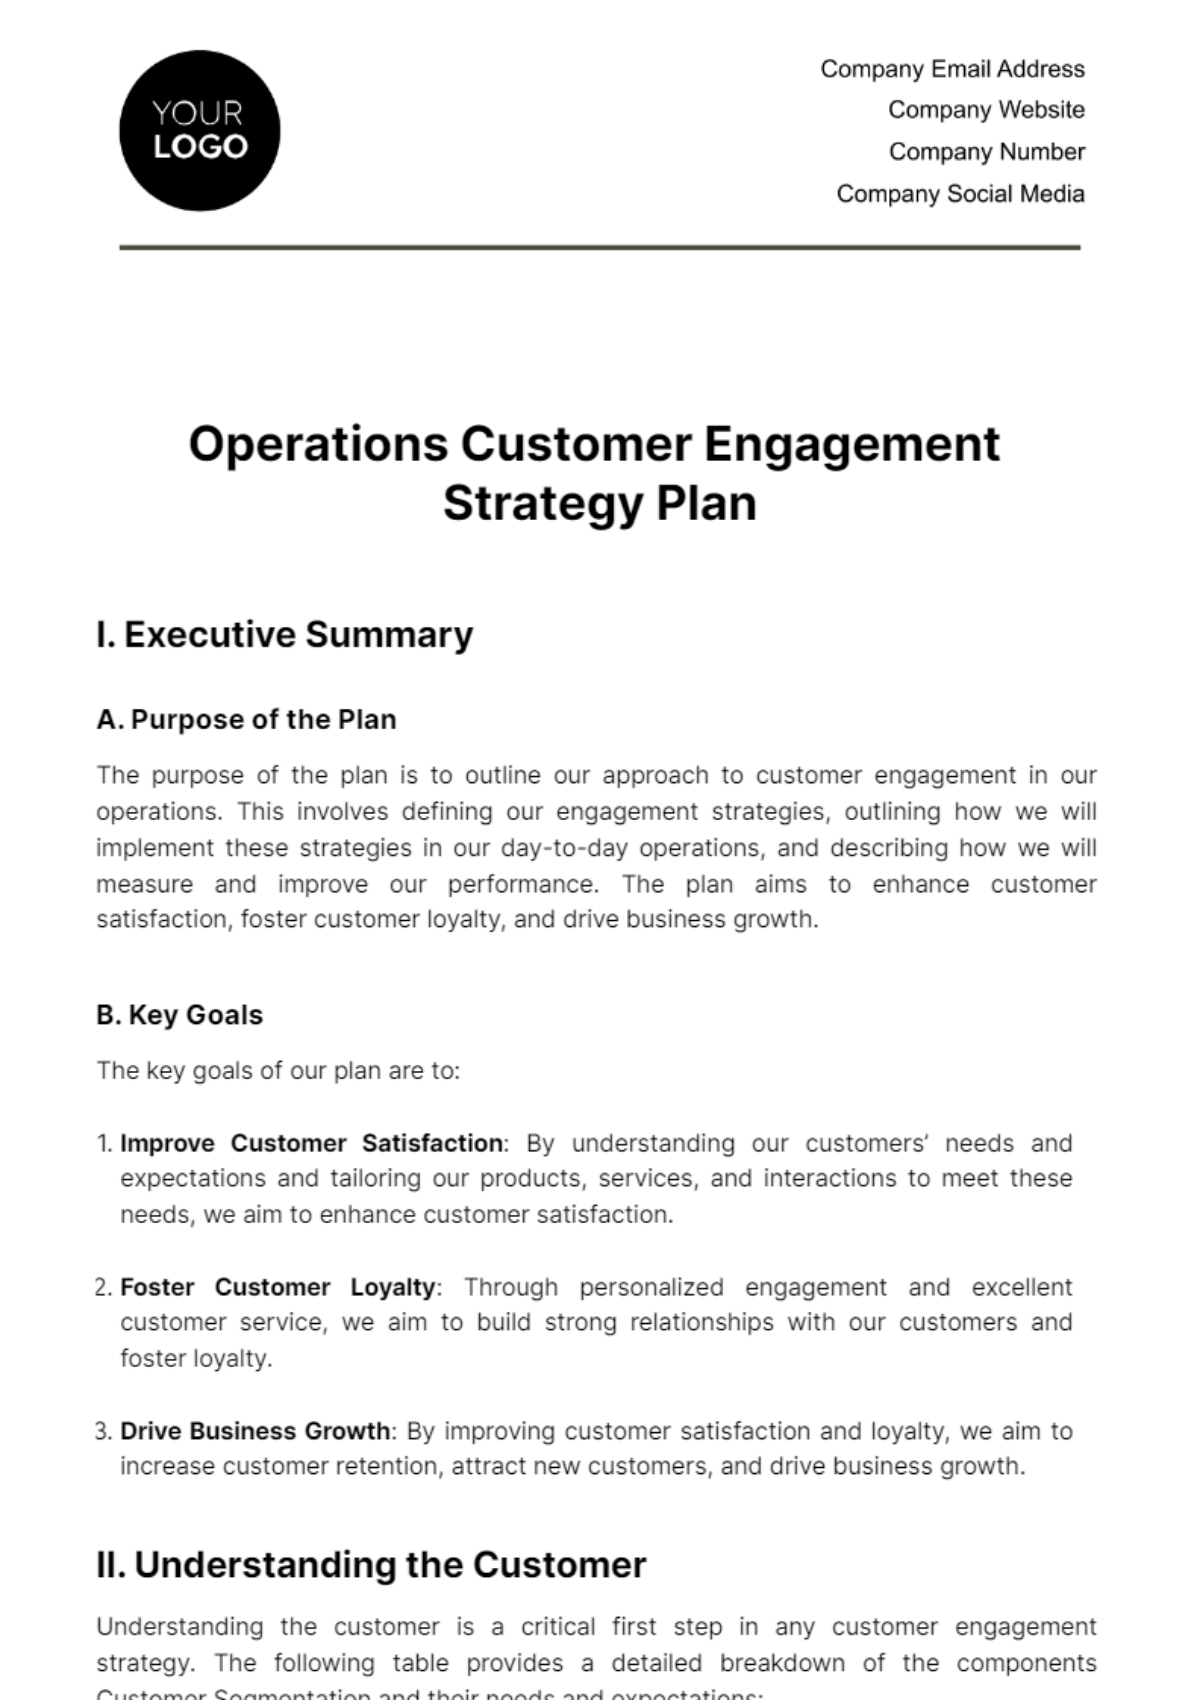 Free Operations Customer Engagement Strategy Plan Template